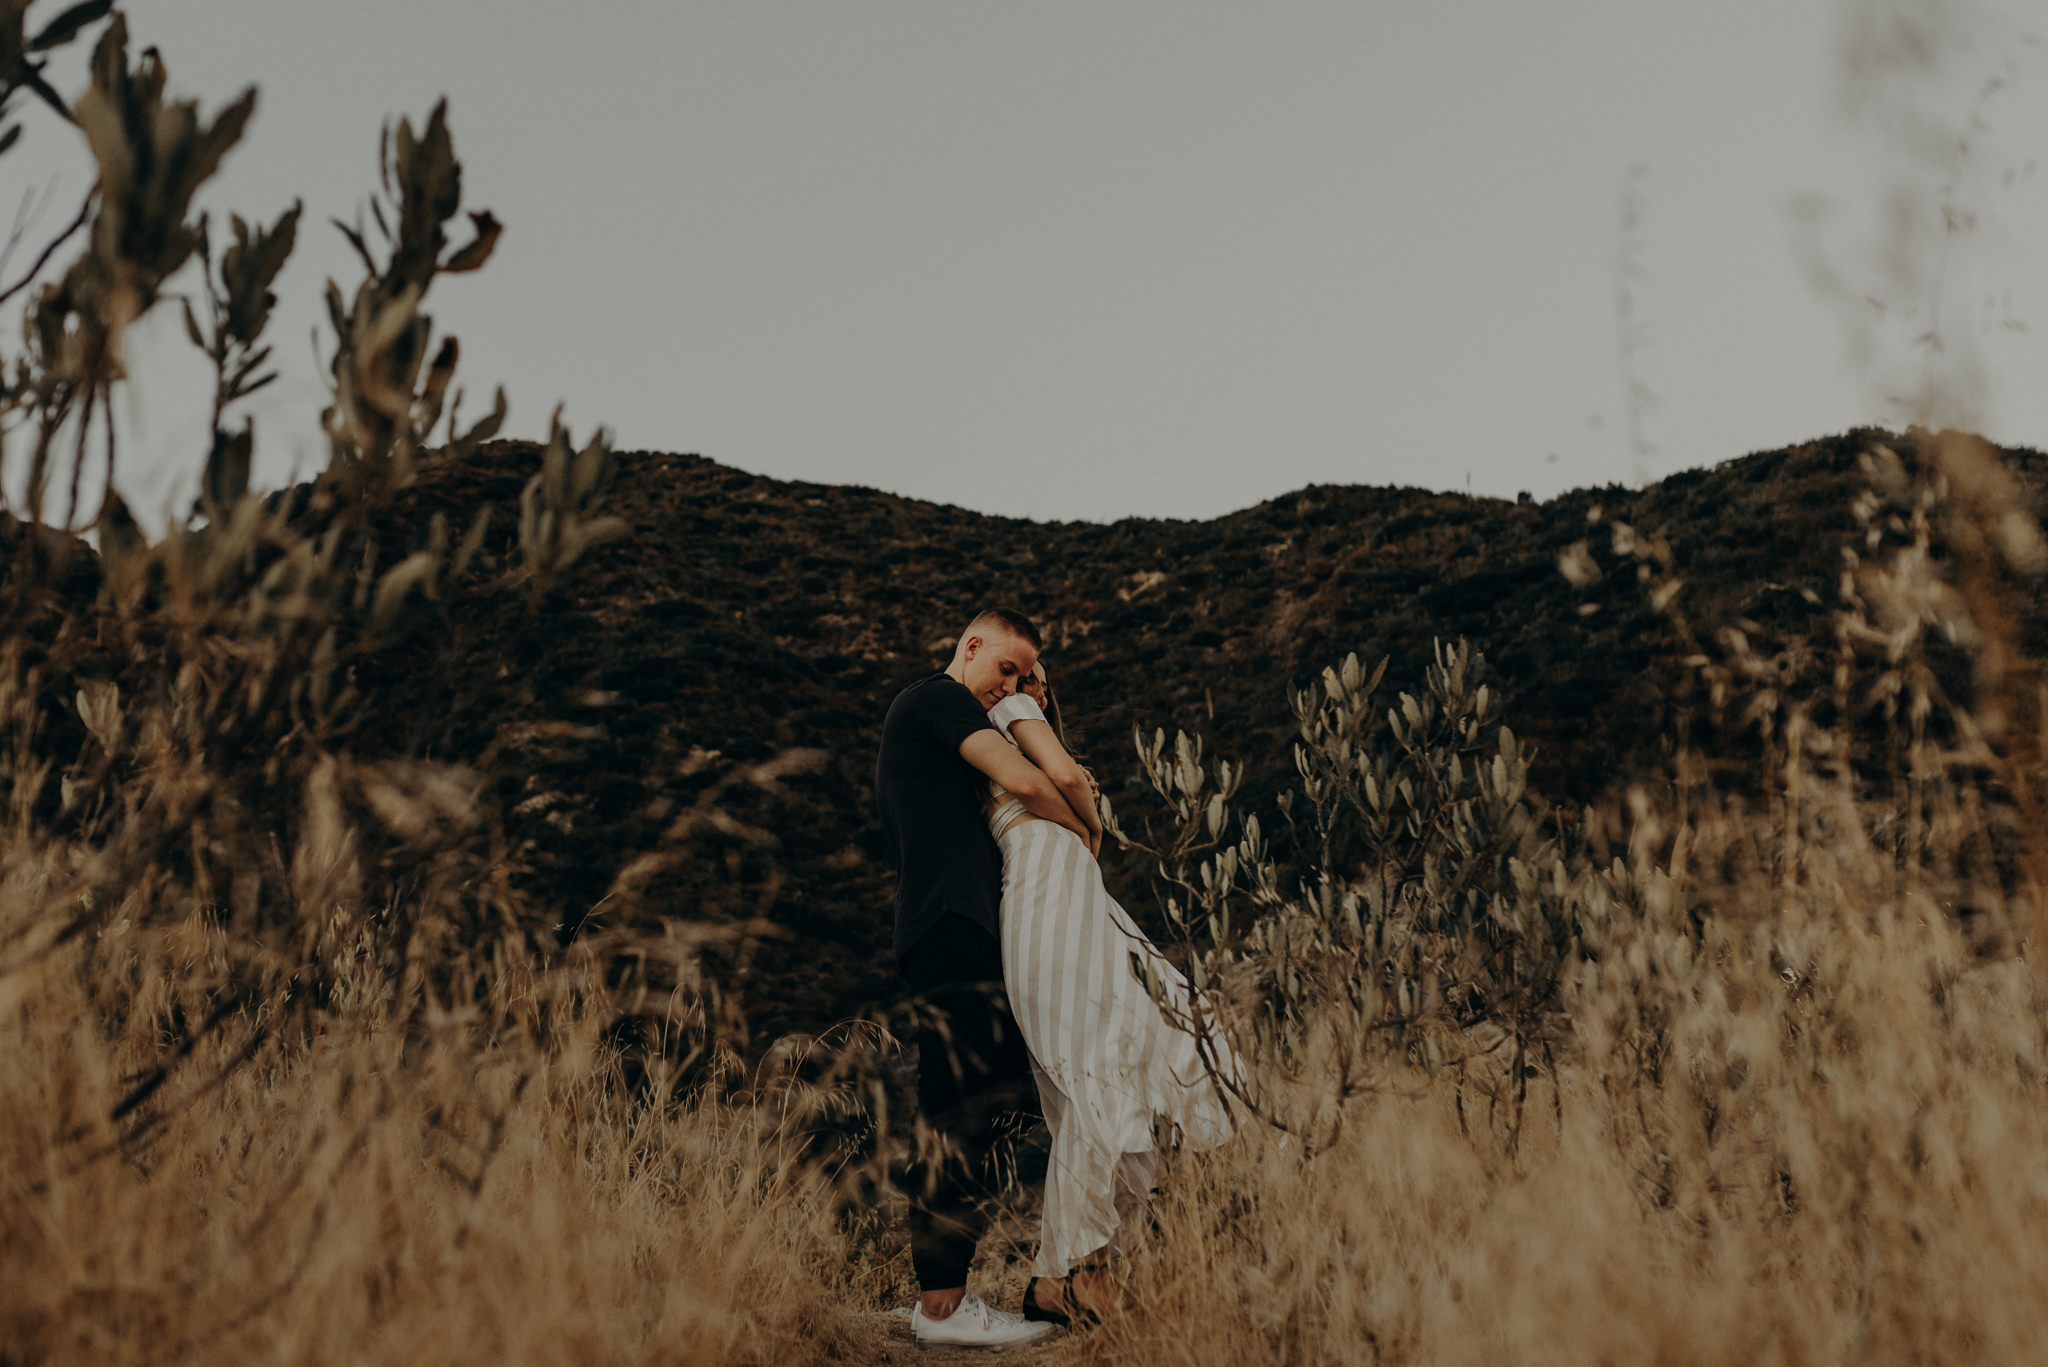 Isaiah + Taylor Photography - Los Angeles Forest Engagement Session - Laid back wedding photographer-027.jpg